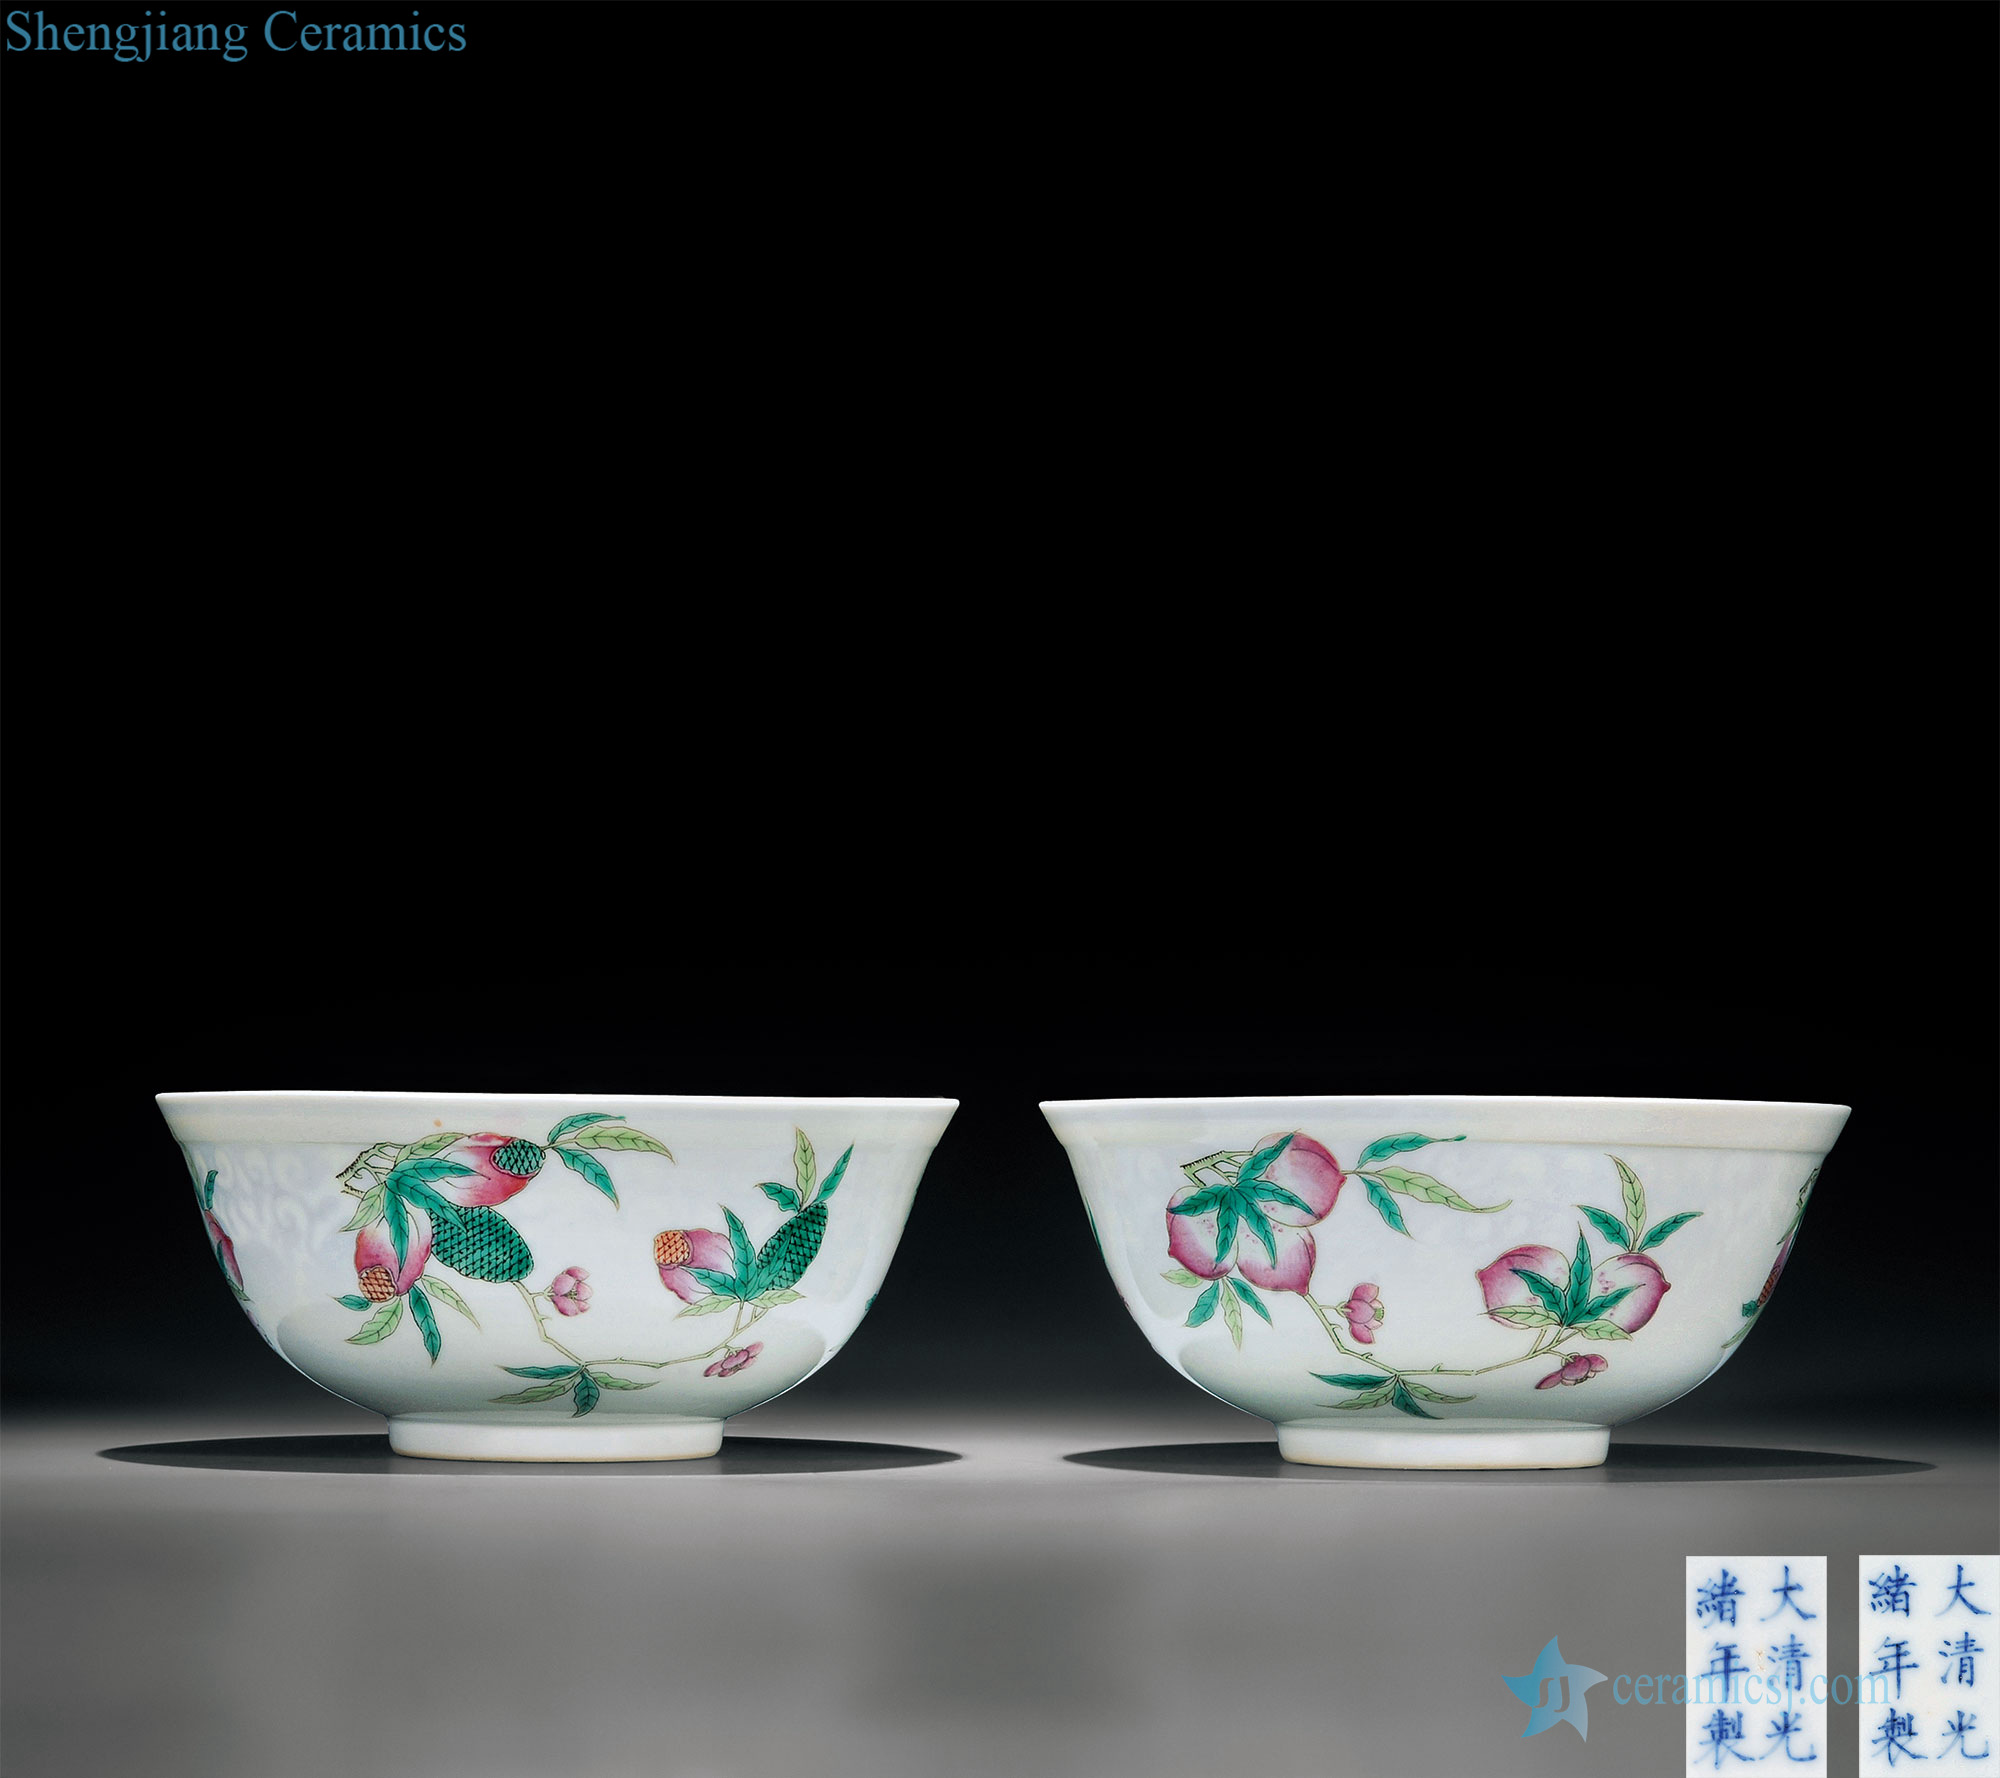 Blue and white lotus pattern in the reign of qing emperor guangxu outer enamel sanduo green-splashed bowls (a)